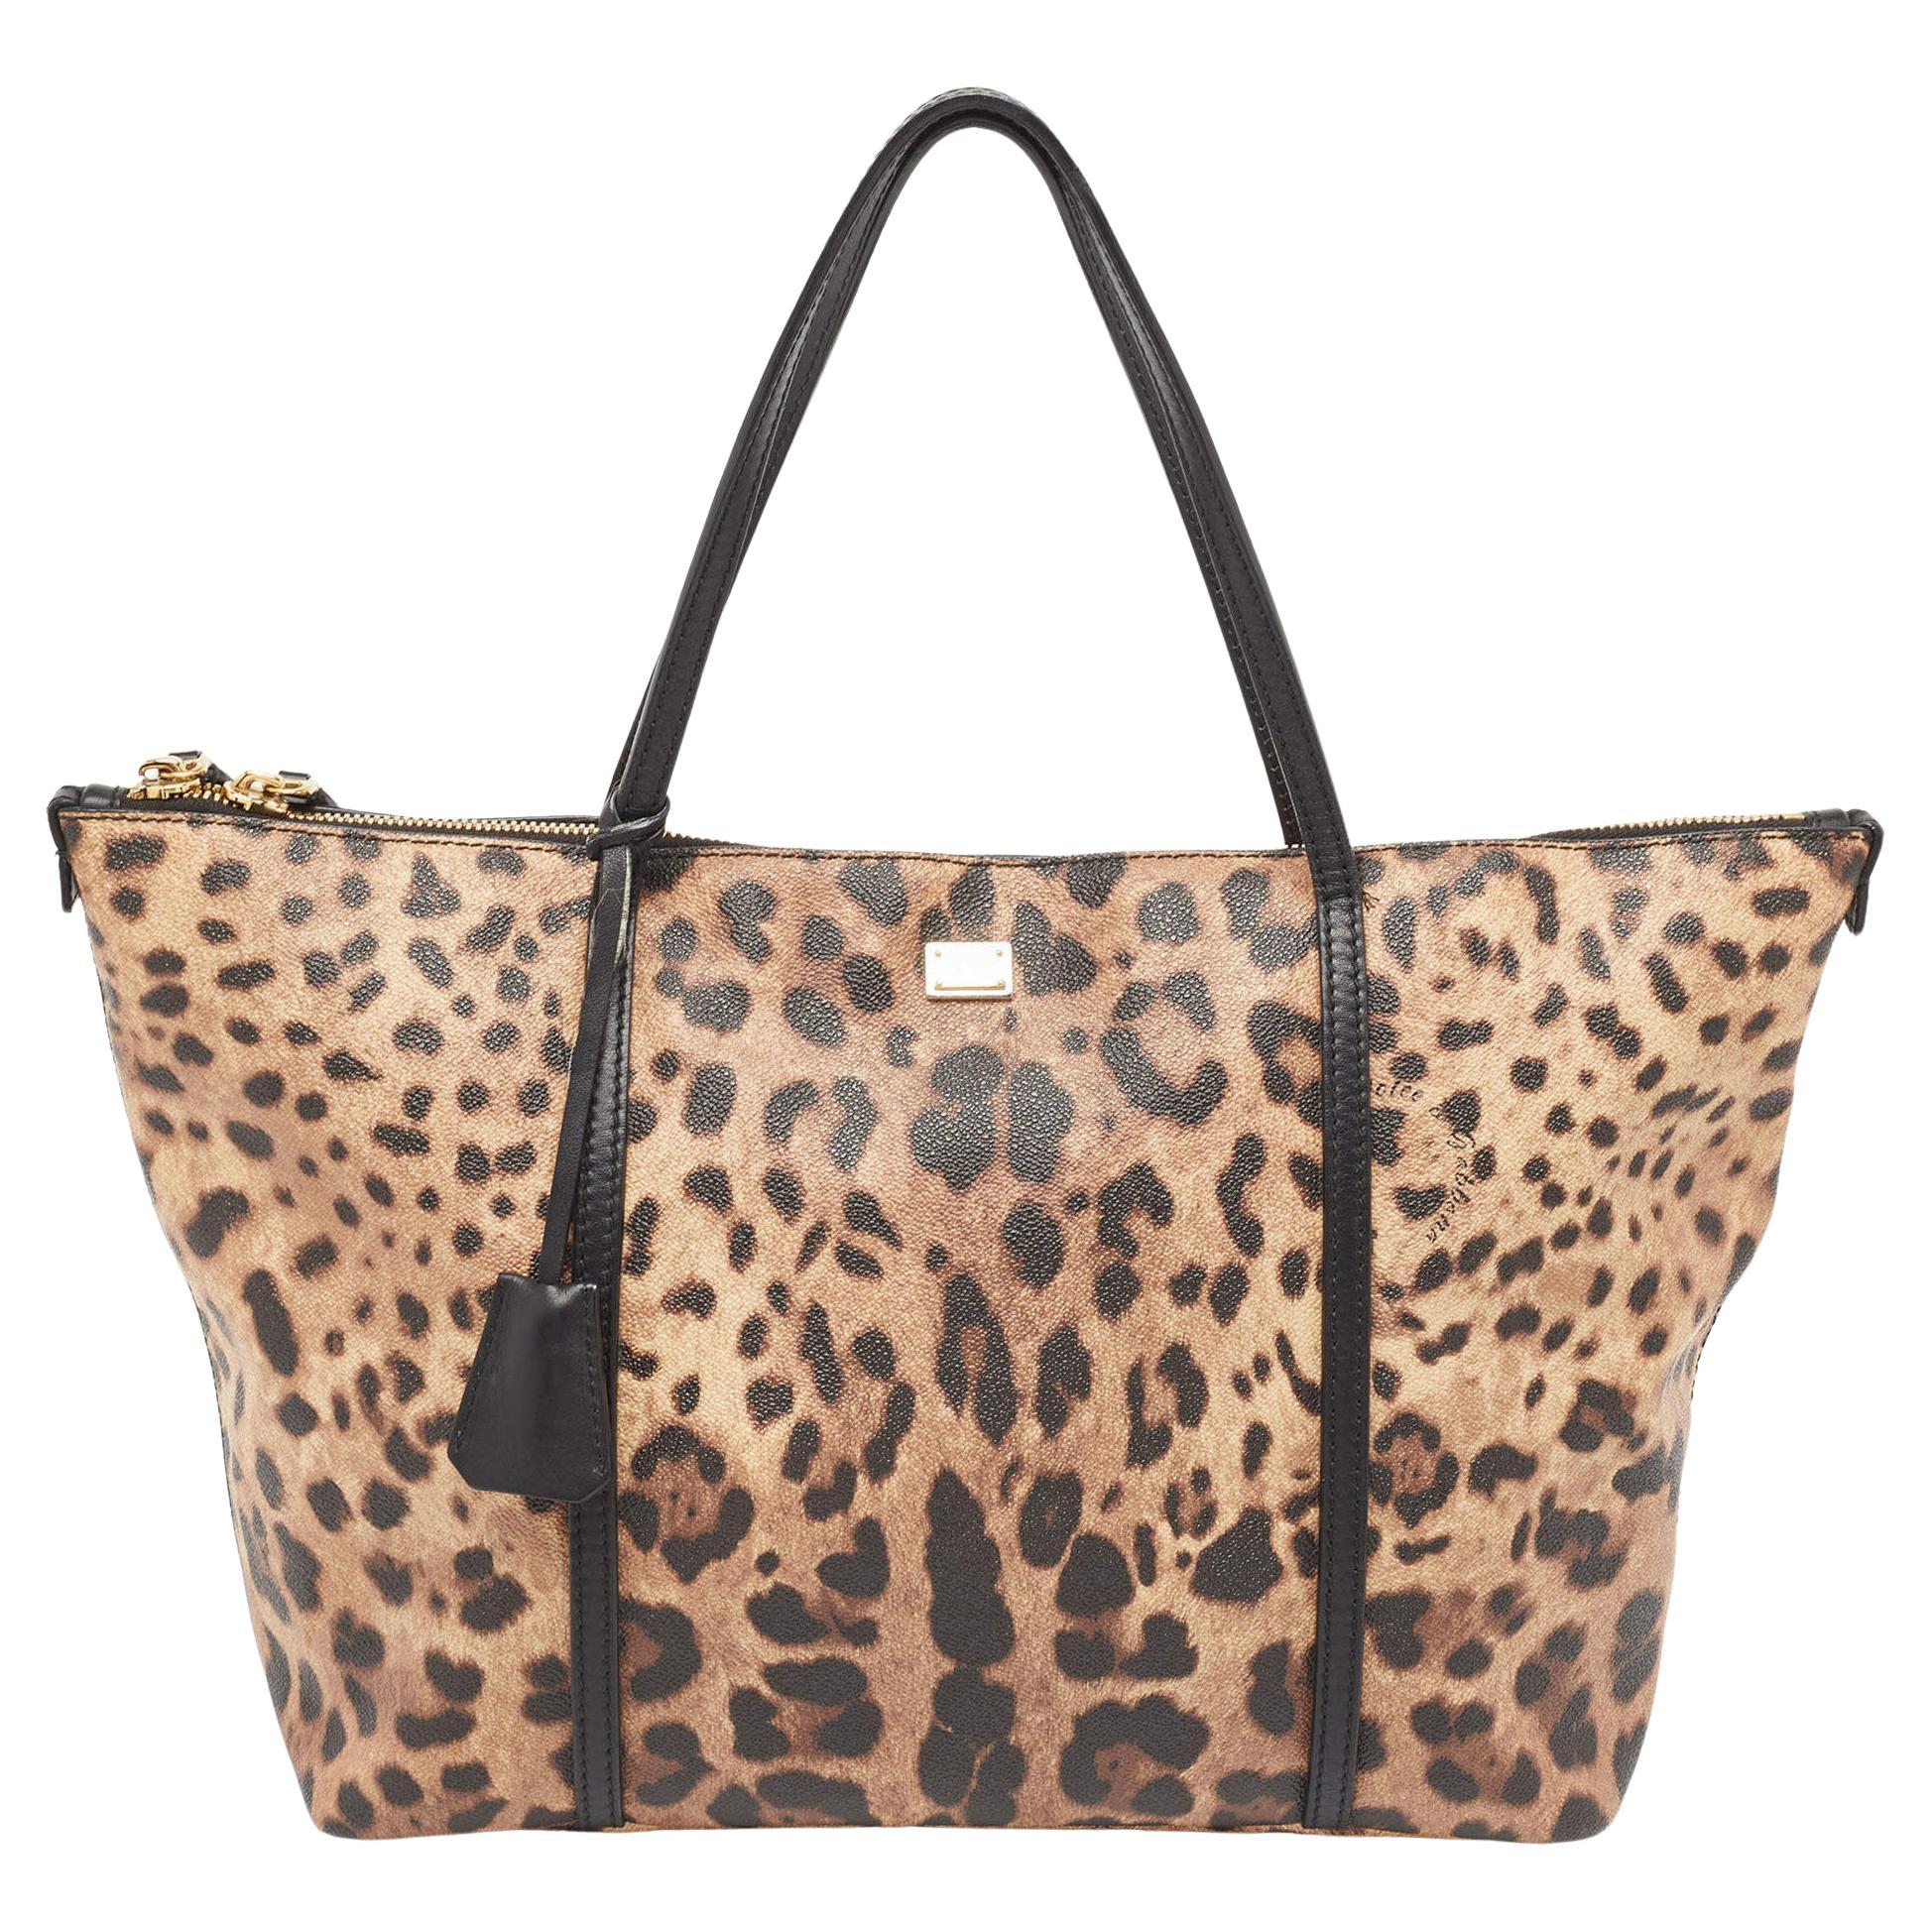 Dolce & Gabbana Leopard Print Coated Canvas and Leather Miss Escape Zip Tote